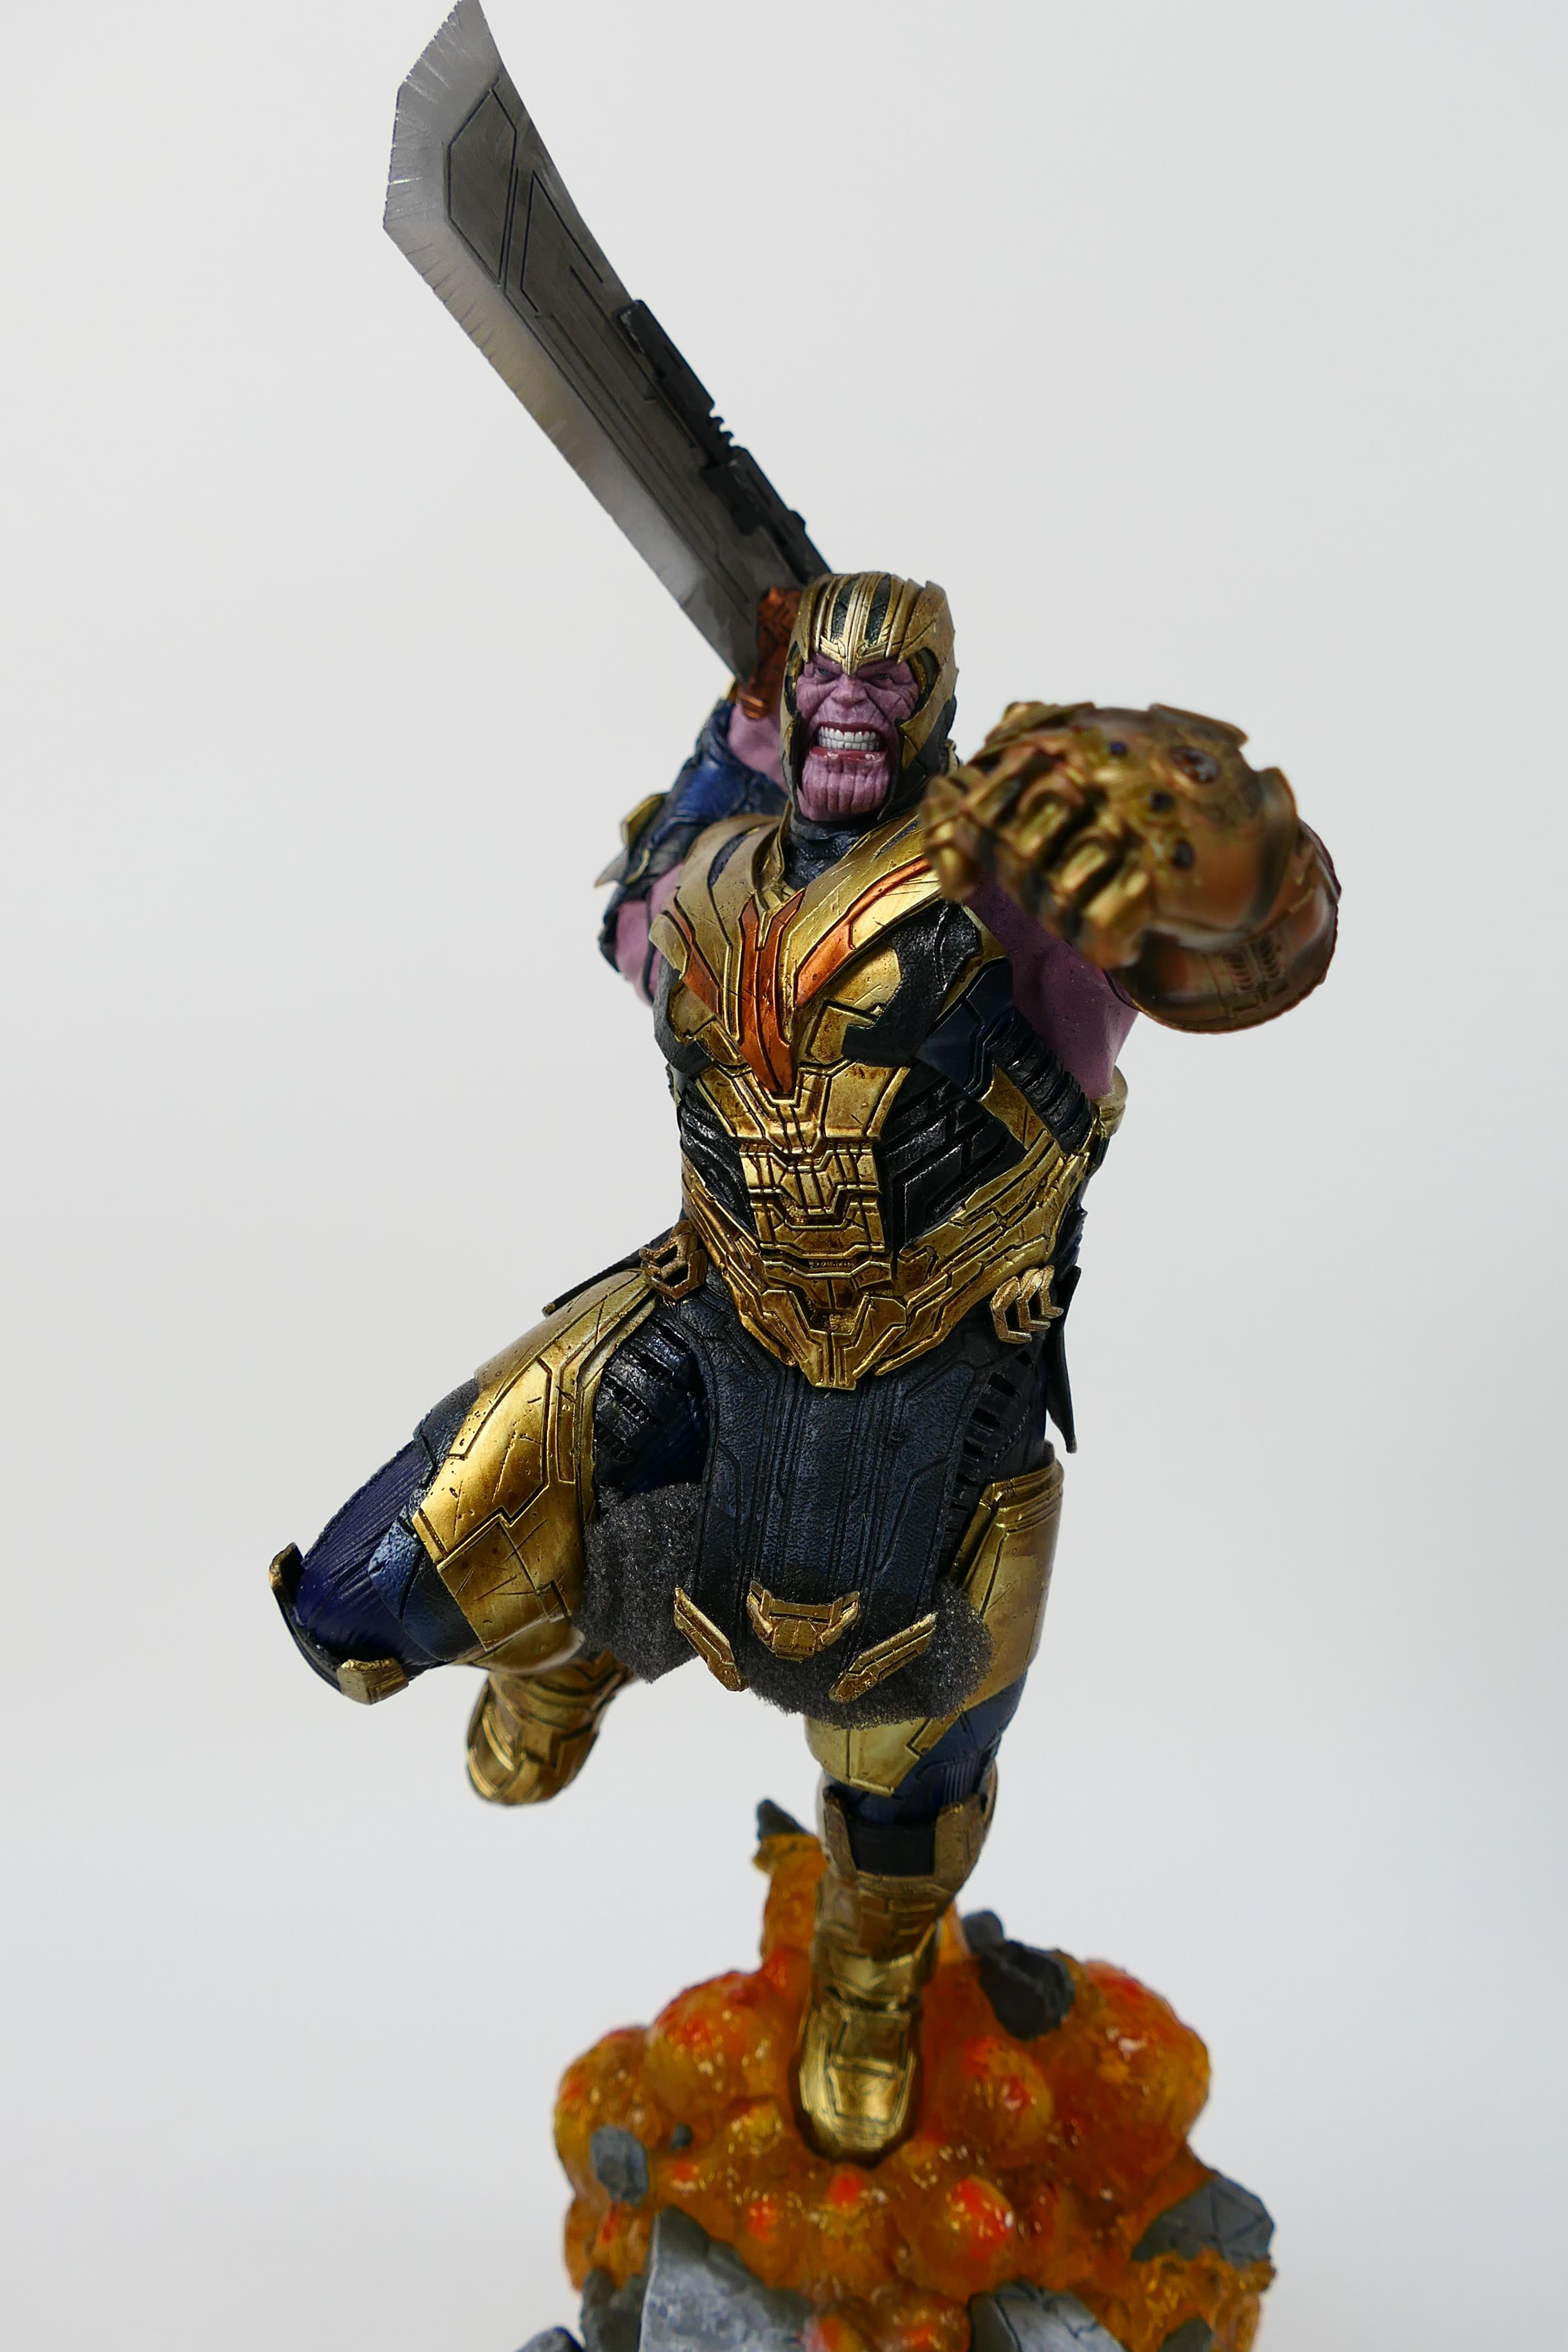 Marvel - Iron Studios - A limited edition BDS Deluxe Avengers Endgame Thanos statue in 1/10 scale. - Image 7 of 8